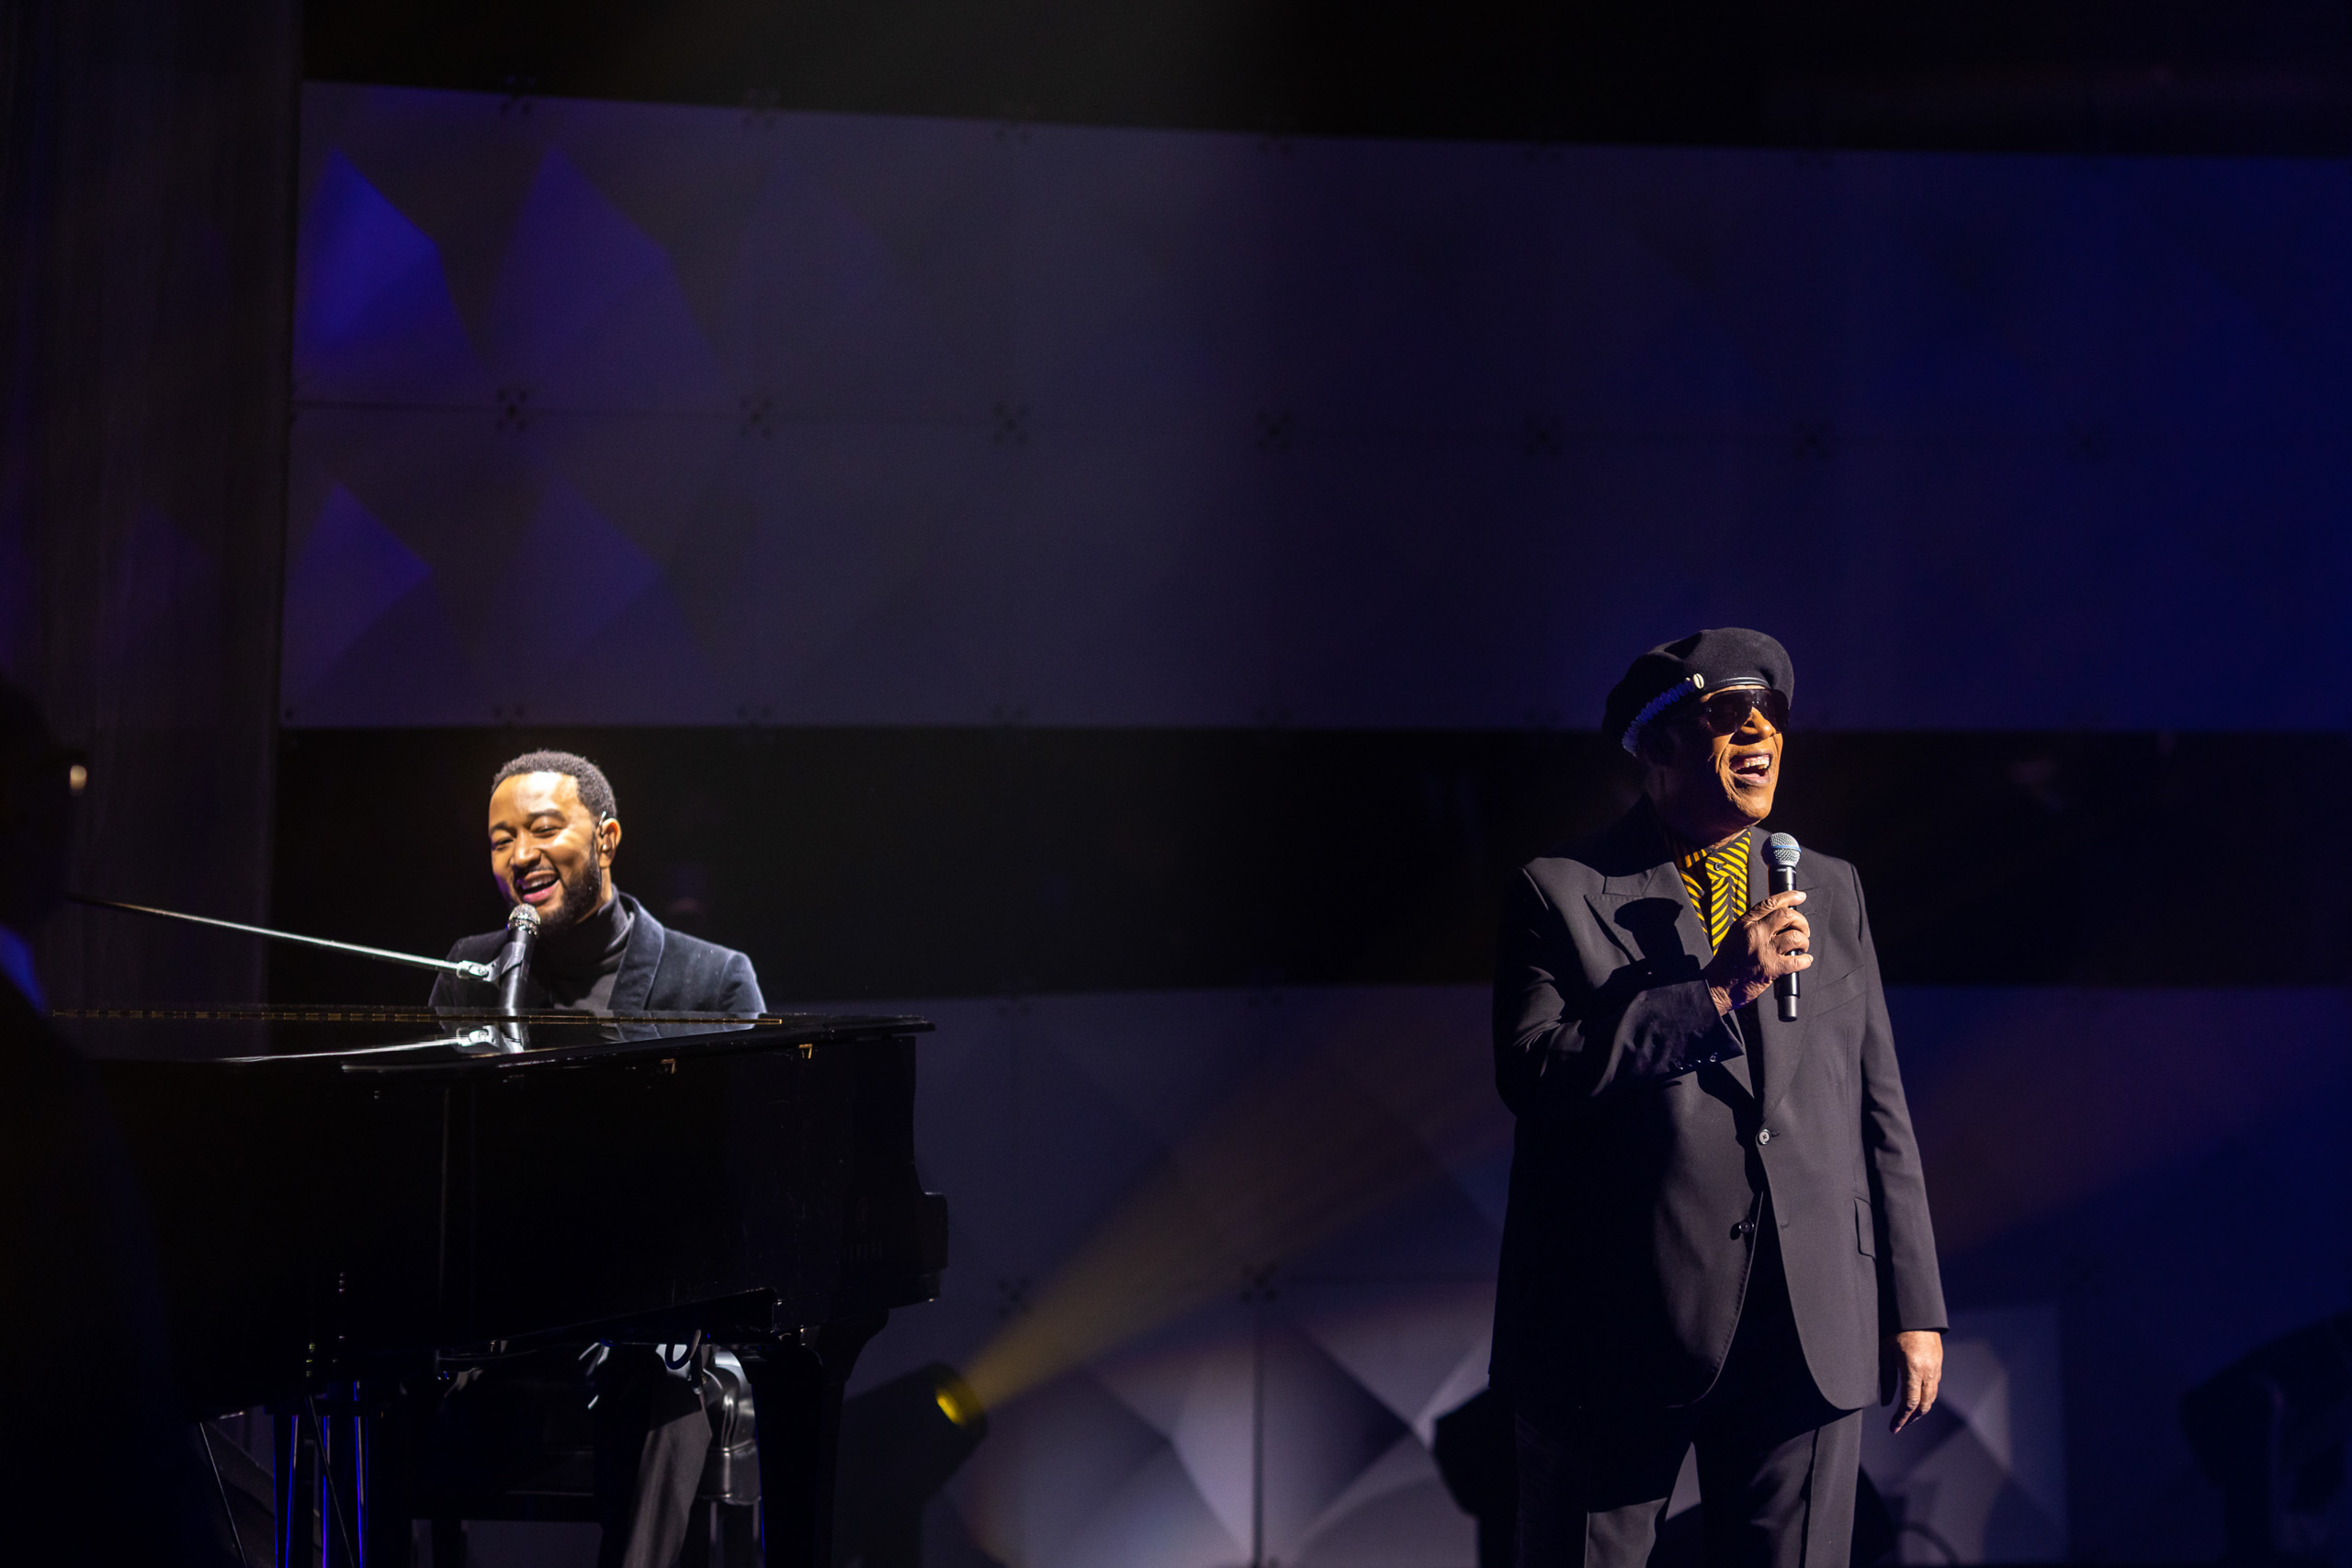 john legend performing on stage.